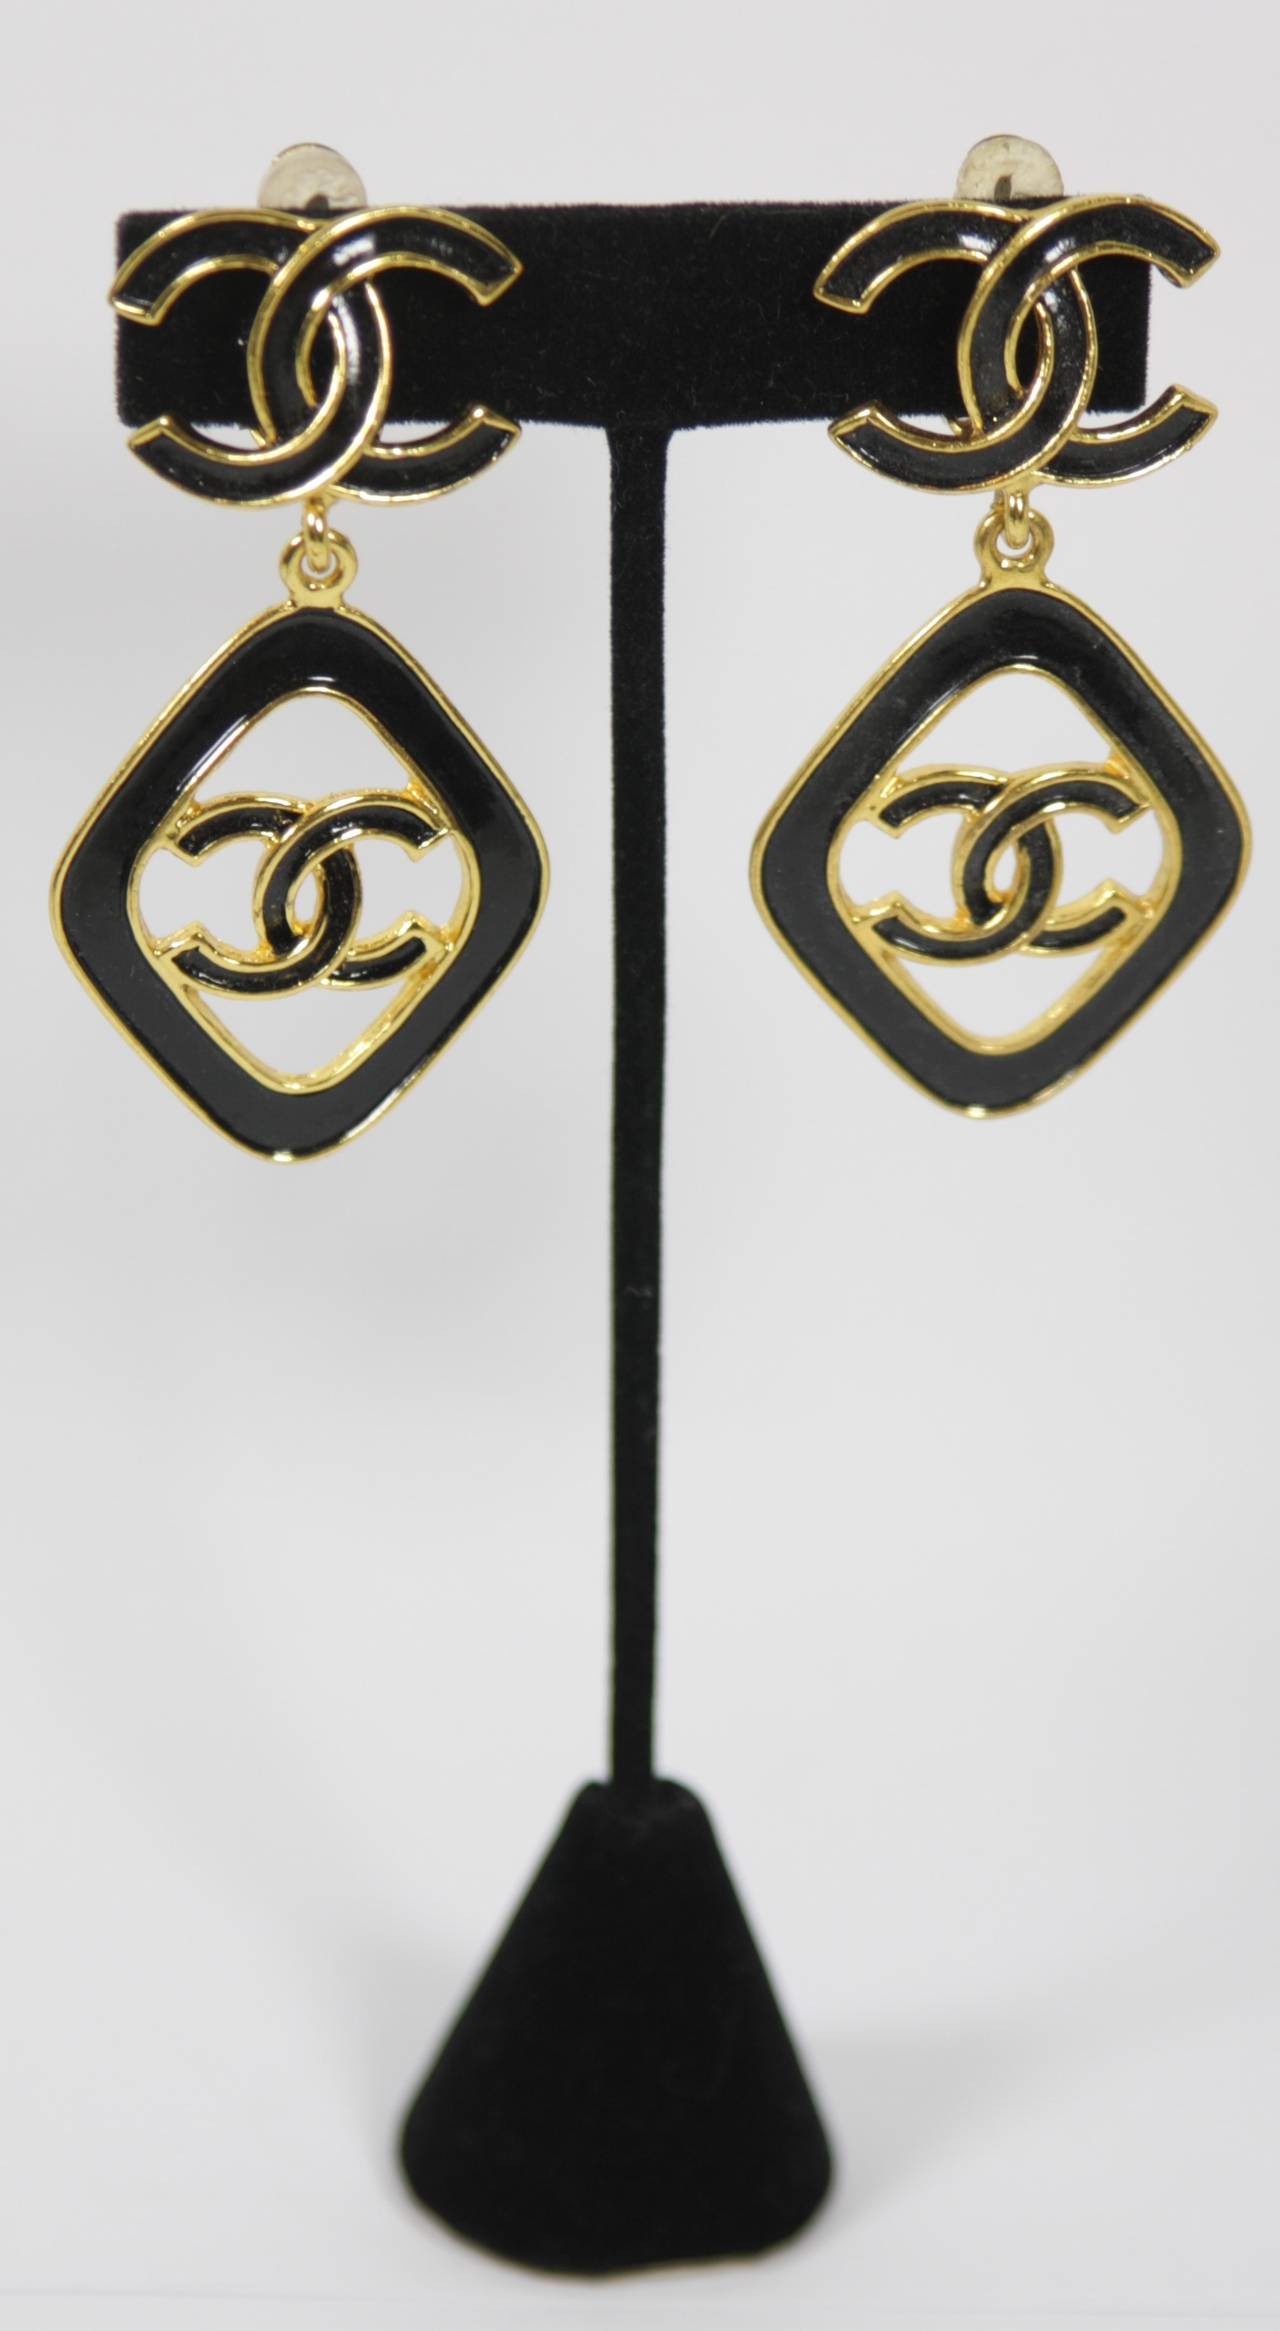 These Chanel earrings are available for viewing at our Beverly Hills Boutique. We offer a large selection of evening gowns and luxury garments.

The earrings are composed of a gold tone metal and are accented with black enamel. They are clip on